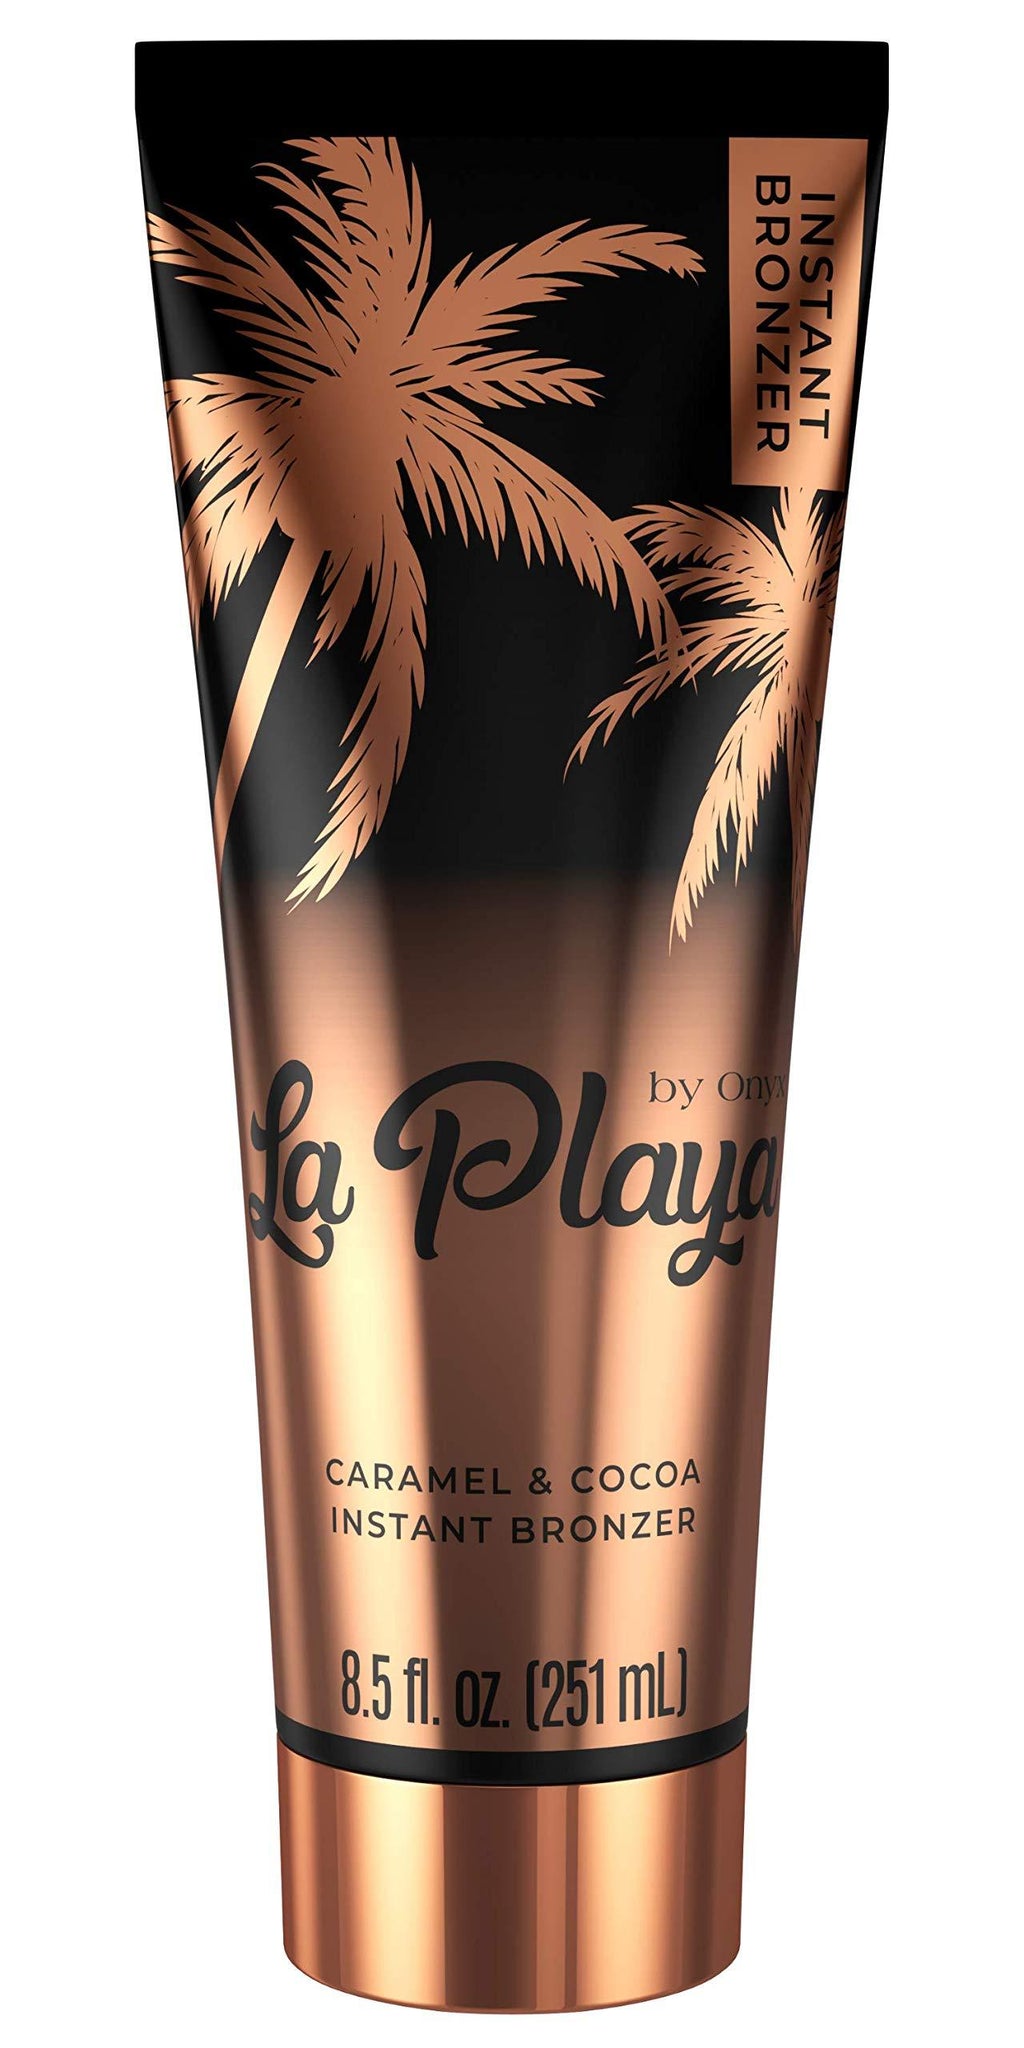 Onyx La Playa - Instant Browning Lotion | Sunless Tanner | Natural Caramel & Cocoa Based Tinted Body Moisturizer I Use Every Day For Glowing Skin - NewNest Australia